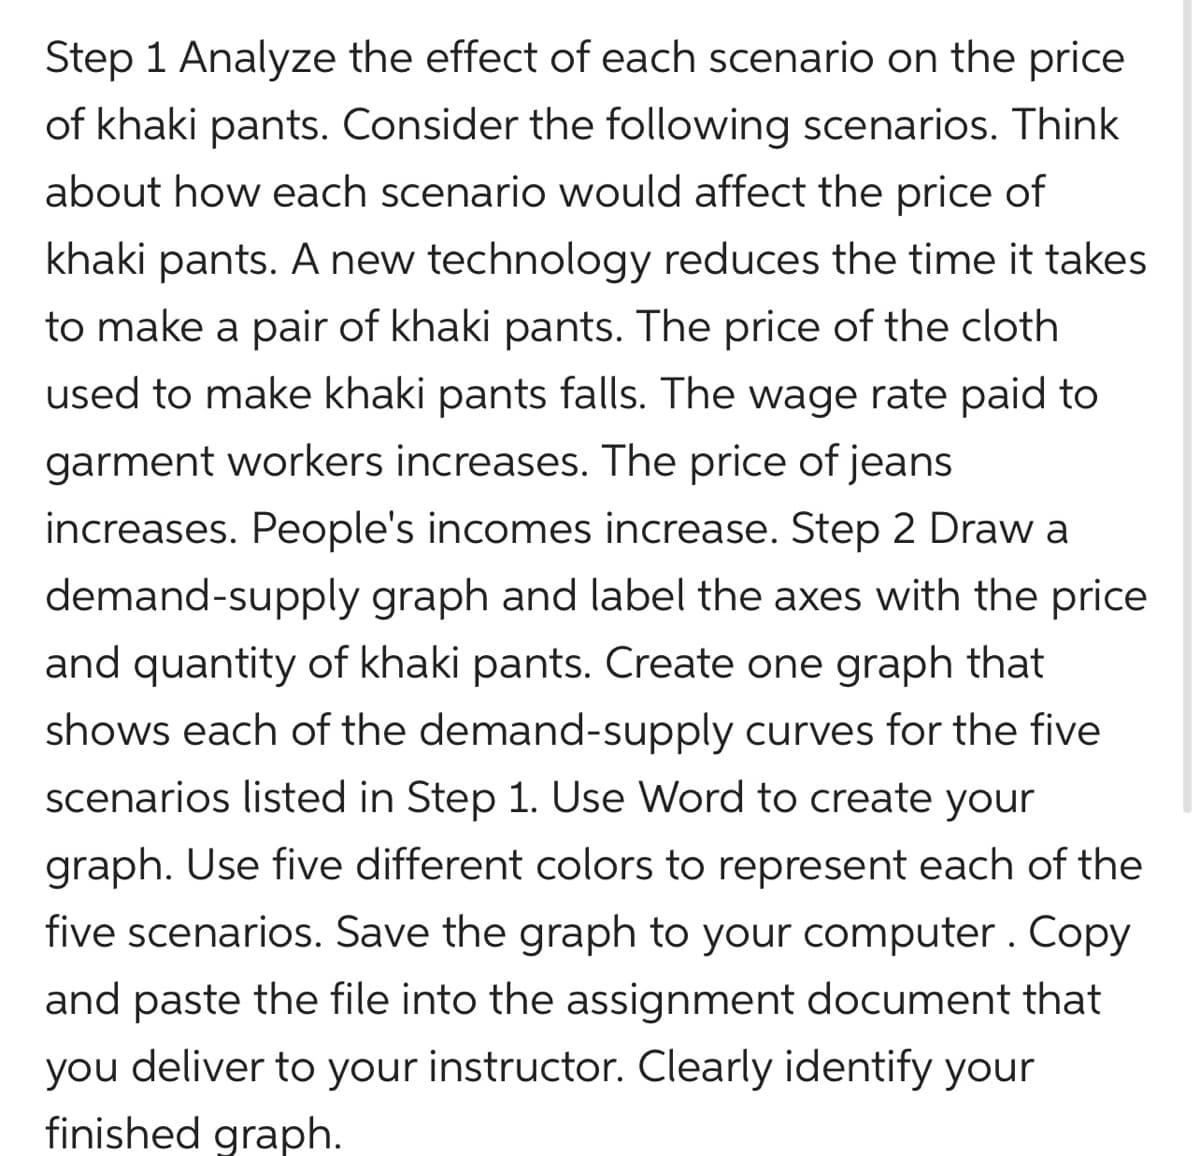 Step 1 Analyze the effect of each scenario on the price
of khaki pants. Consider the following scenarios. Think
about how each scenario would affect the price of
khaki pants. A new technology reduces the time it takes
to make a pair of khaki pants. The price of the cloth
used to make khaki pants falls. The wage rate paid to
garment workers increases. The price of jeans
increases. People's incomes increase. Step 2 Draw a
demand-supply graph and label the axes with the price
and quantity of khaki pants. Create one graph that
shows each of the demand-supply curves for the five
scenarios listed in Step 1. Use Word to create your
graph. Use five different colors to represent each of the
five scenarios. Save the graph to your computer. Copy
and paste the file into the assignment document that
you deliver to your instructor. Clearly identify your
finished graph.
